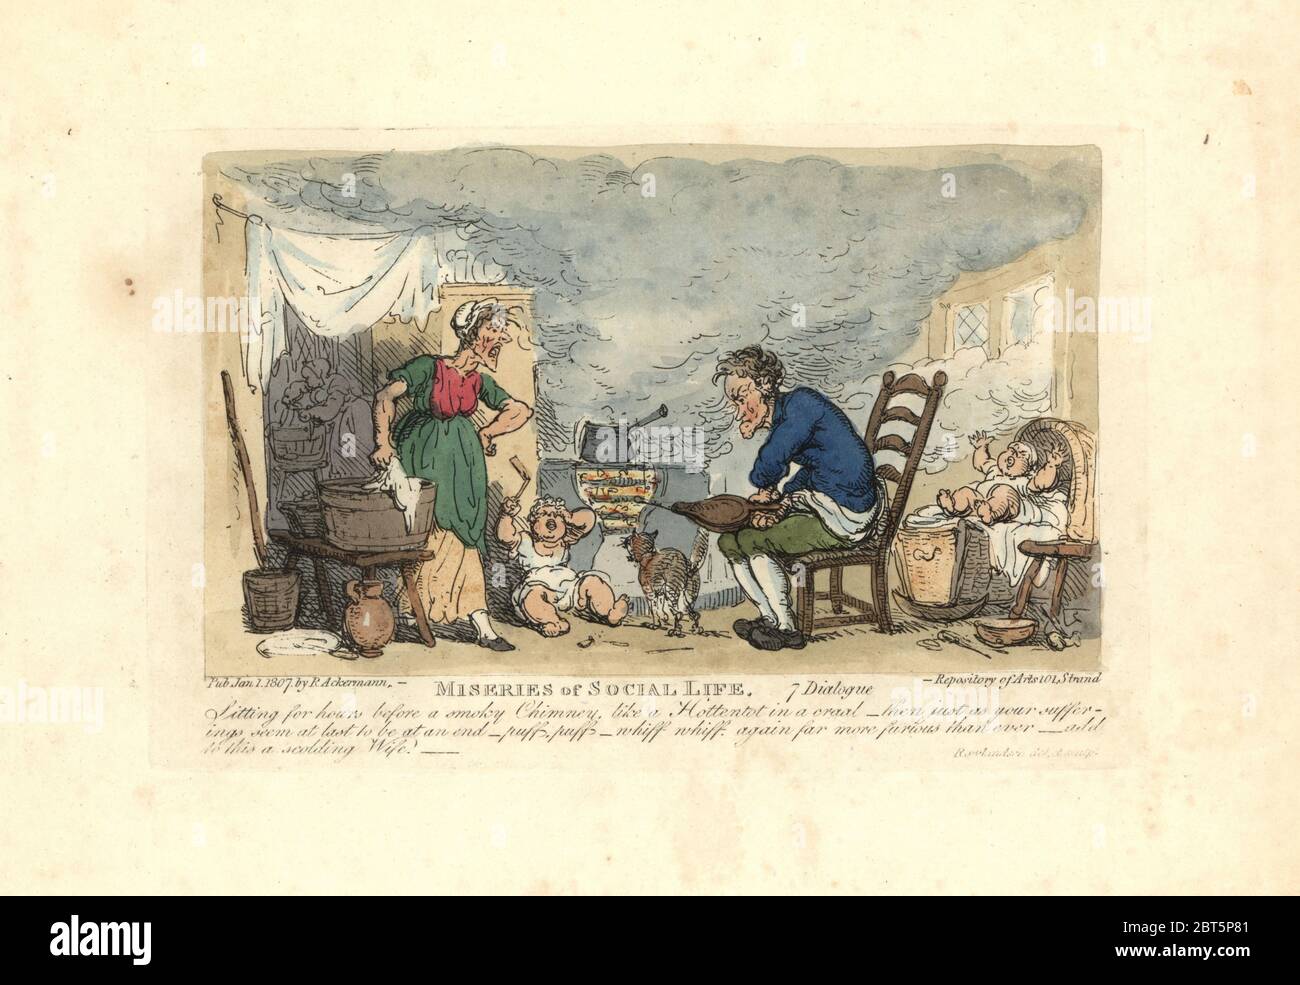 Man using bellows in front of a fire in a smoky room with a scolding wife and bawling child. Handcoloured copperplate engraving designed and etched by Thomas Rowlandson to accompany Reverend James Beresfords Miseries of Human Life, Ackermann, 1808. Stock Photo